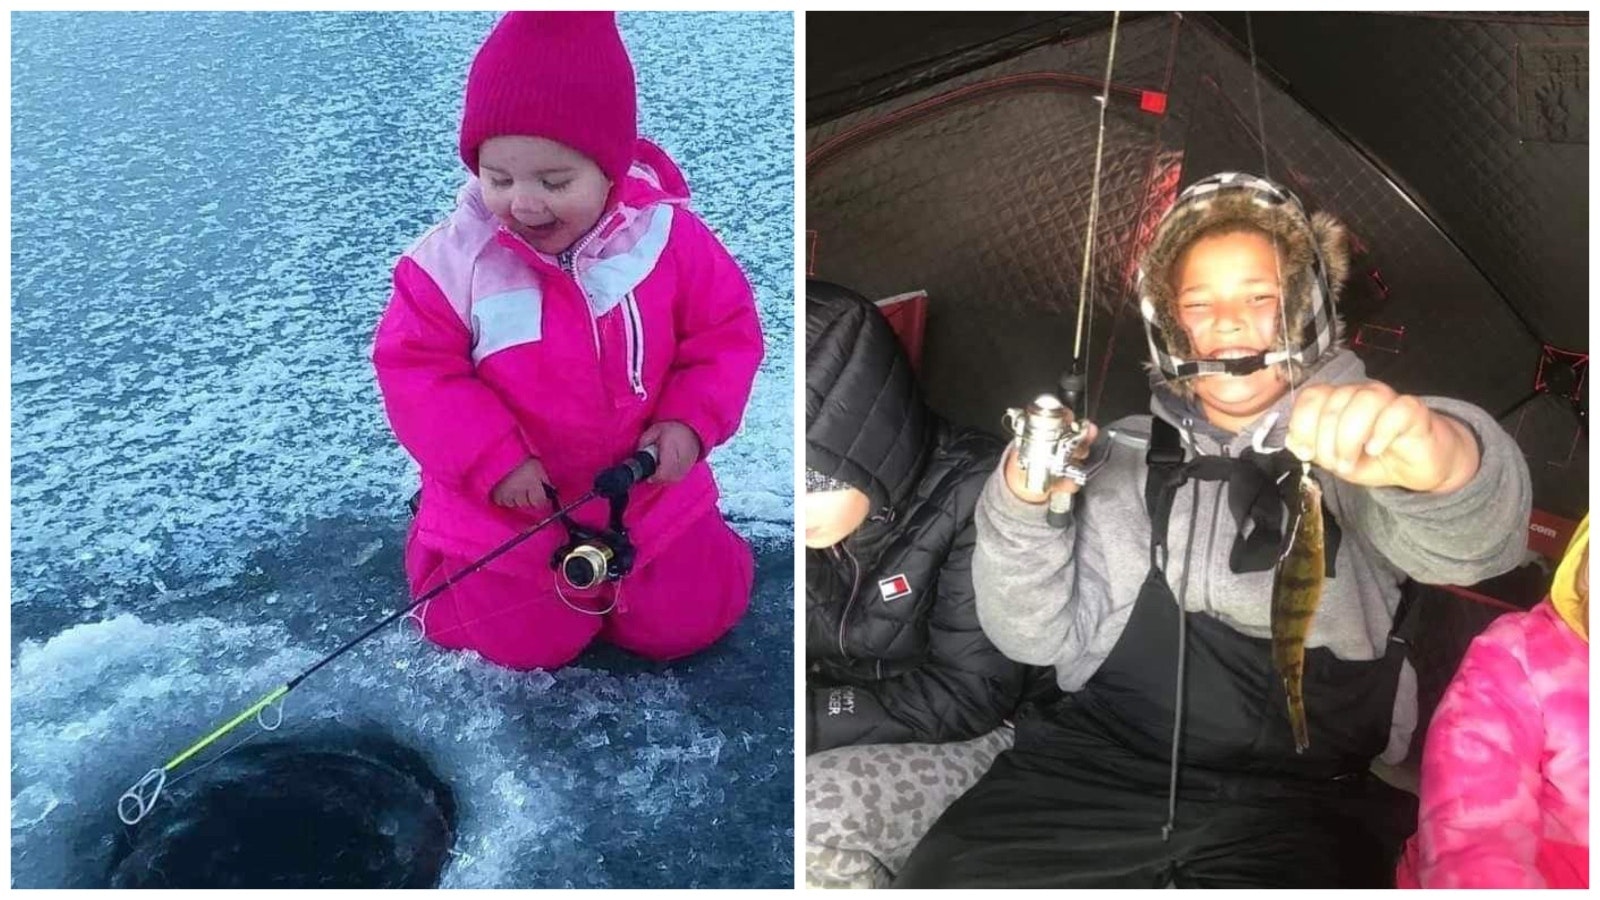 Ice fishing isn't too cold for some hardy Wyoming kids.